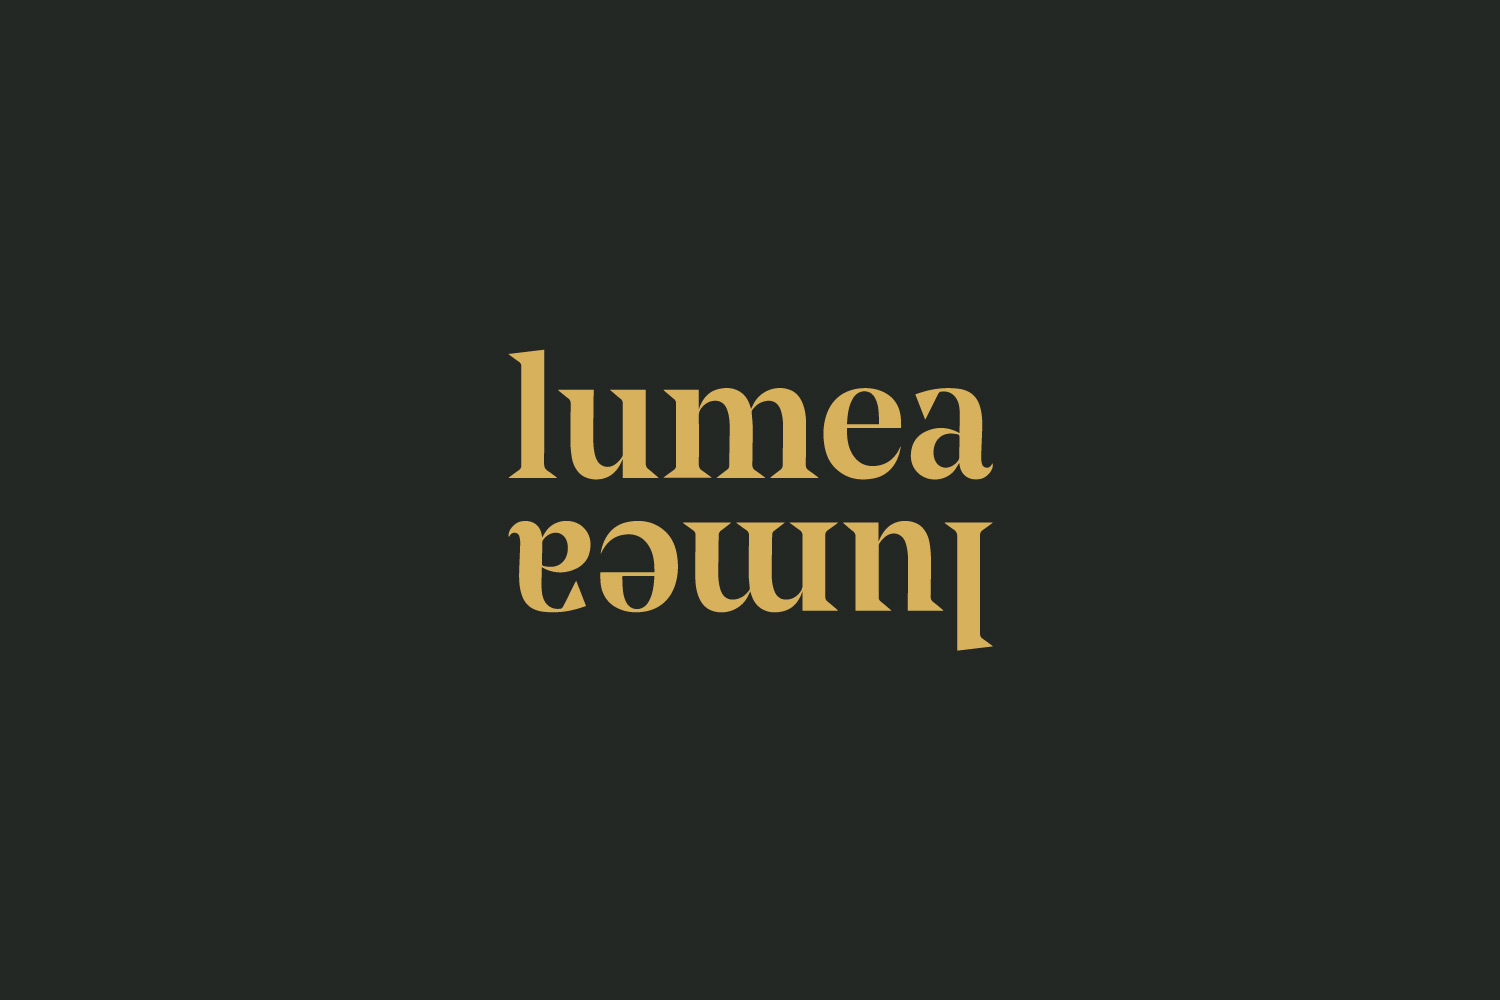 Lumea Photo branding design by Now or Never Design